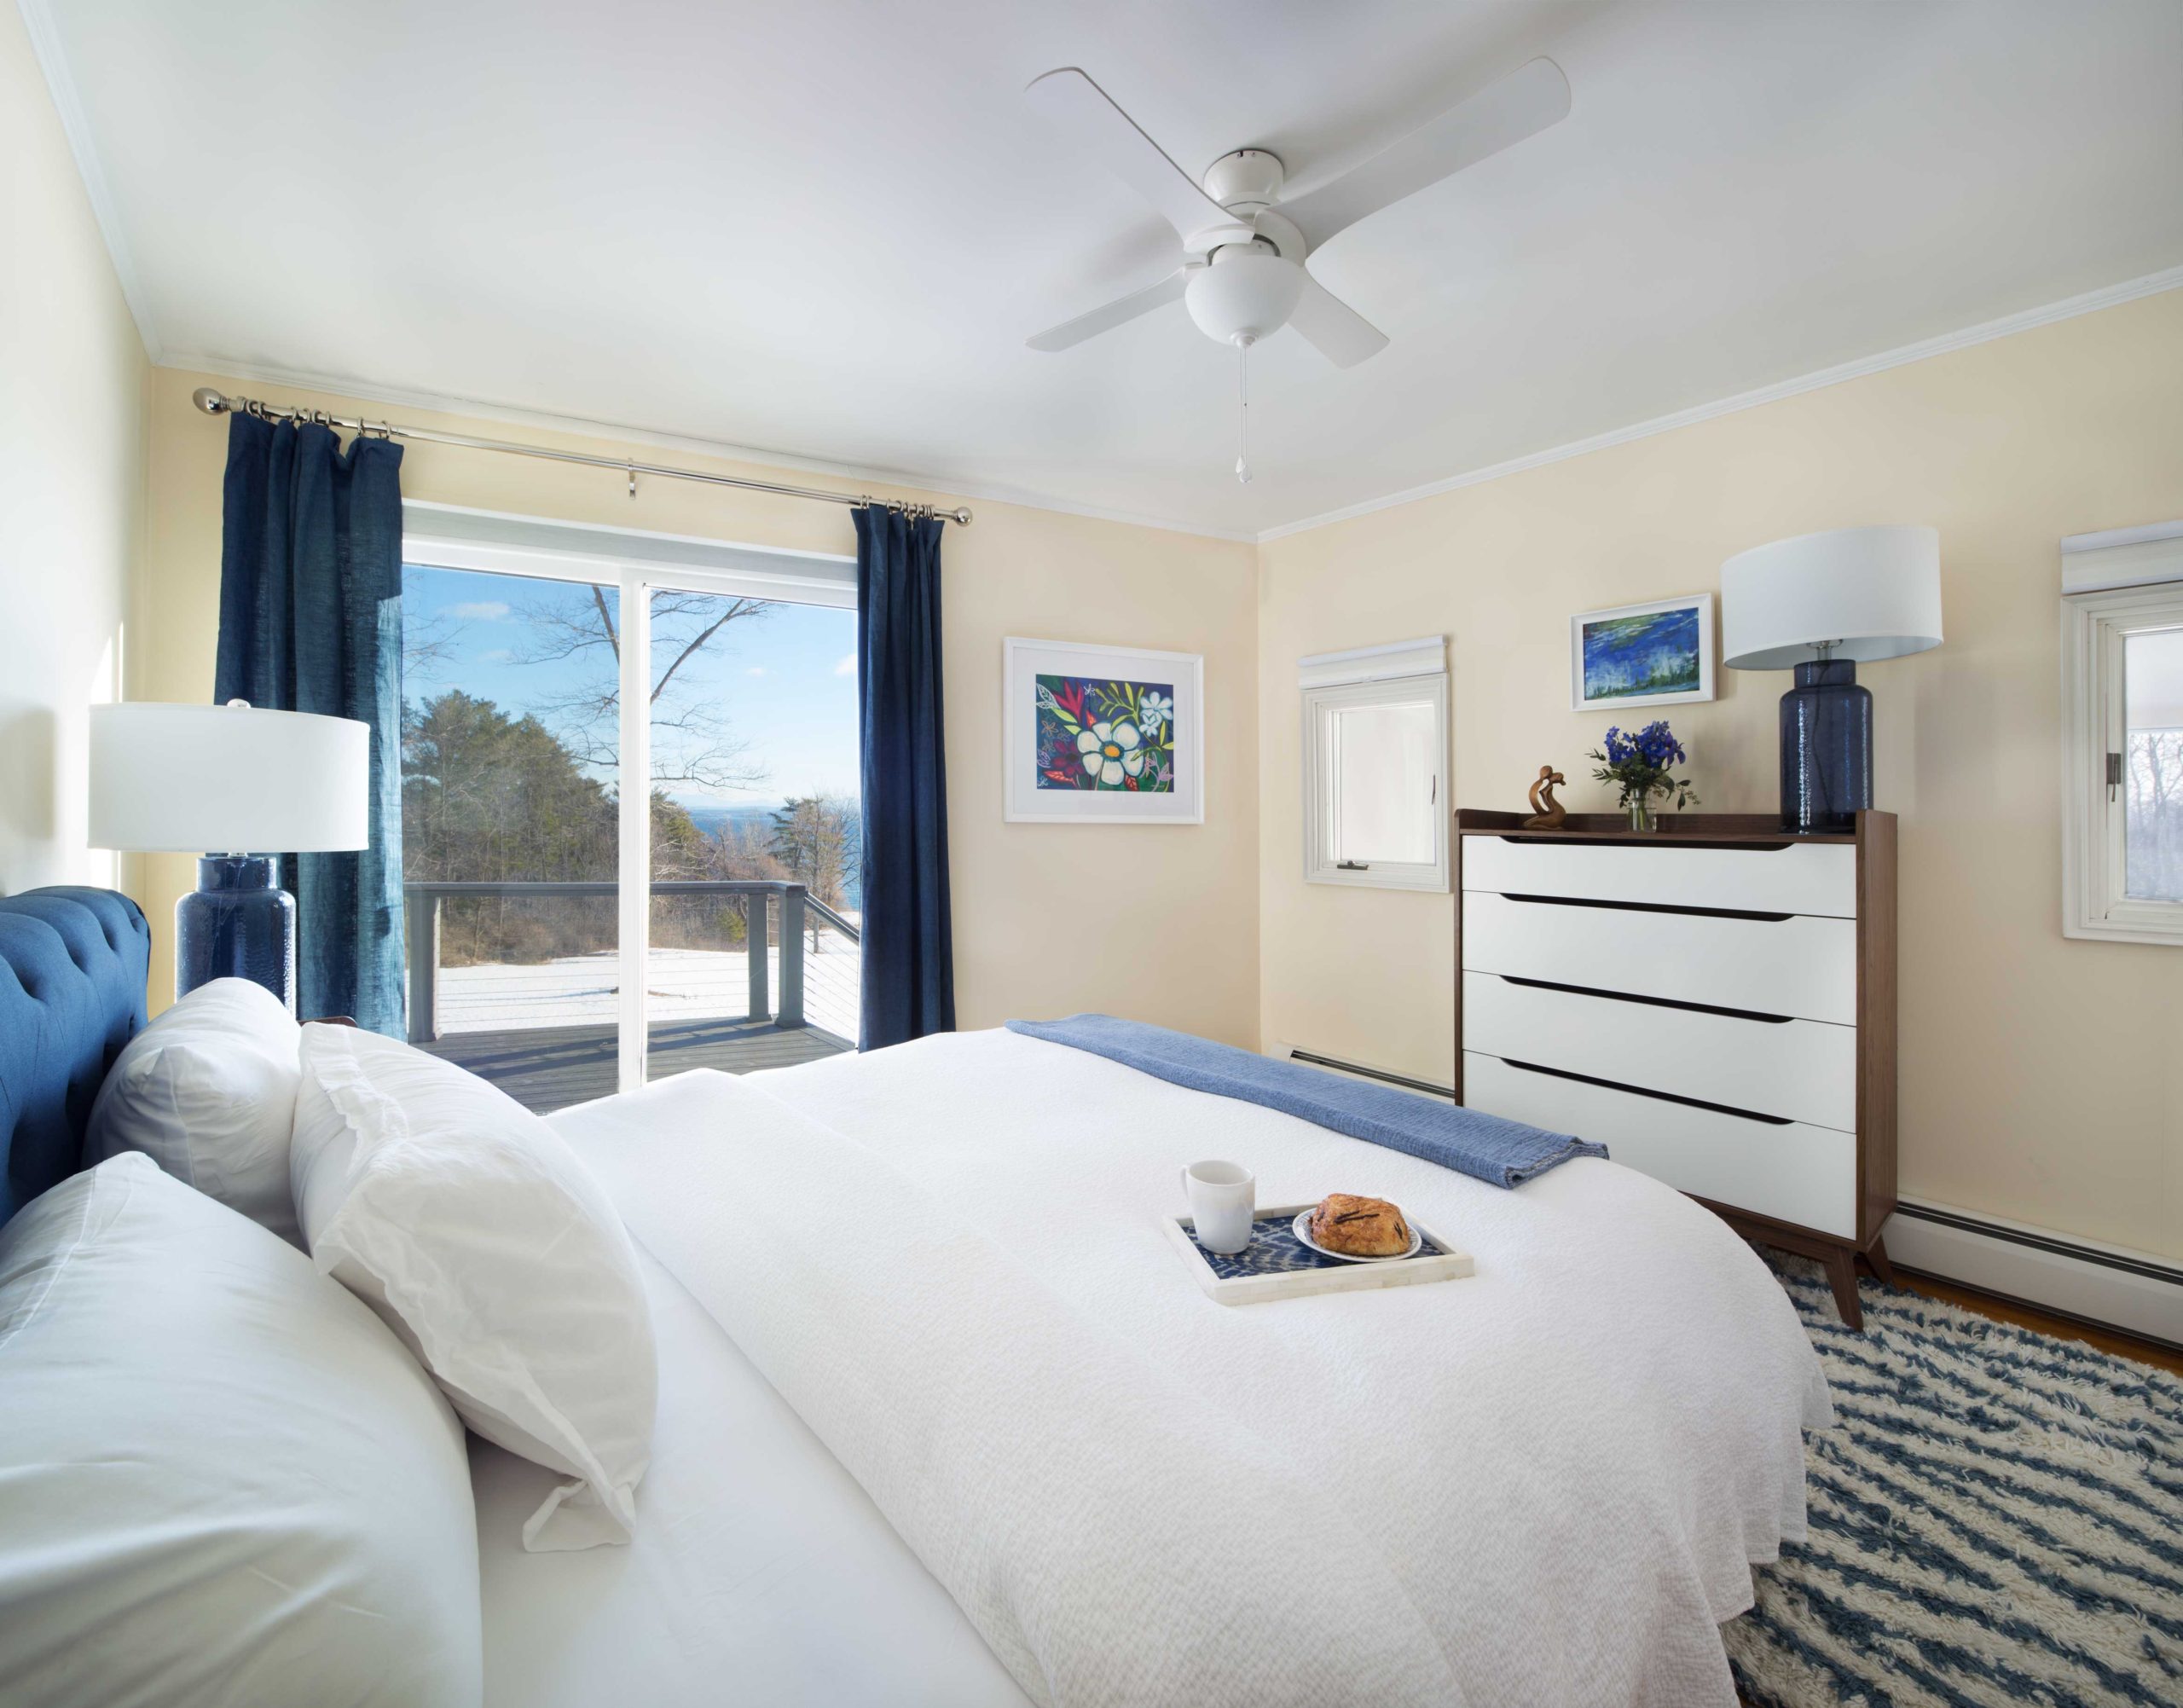 Lake views and sun prevail in the southern blue bedroom, with an organic queen mattress, all-organic bedding, and a private entrance to the deck.